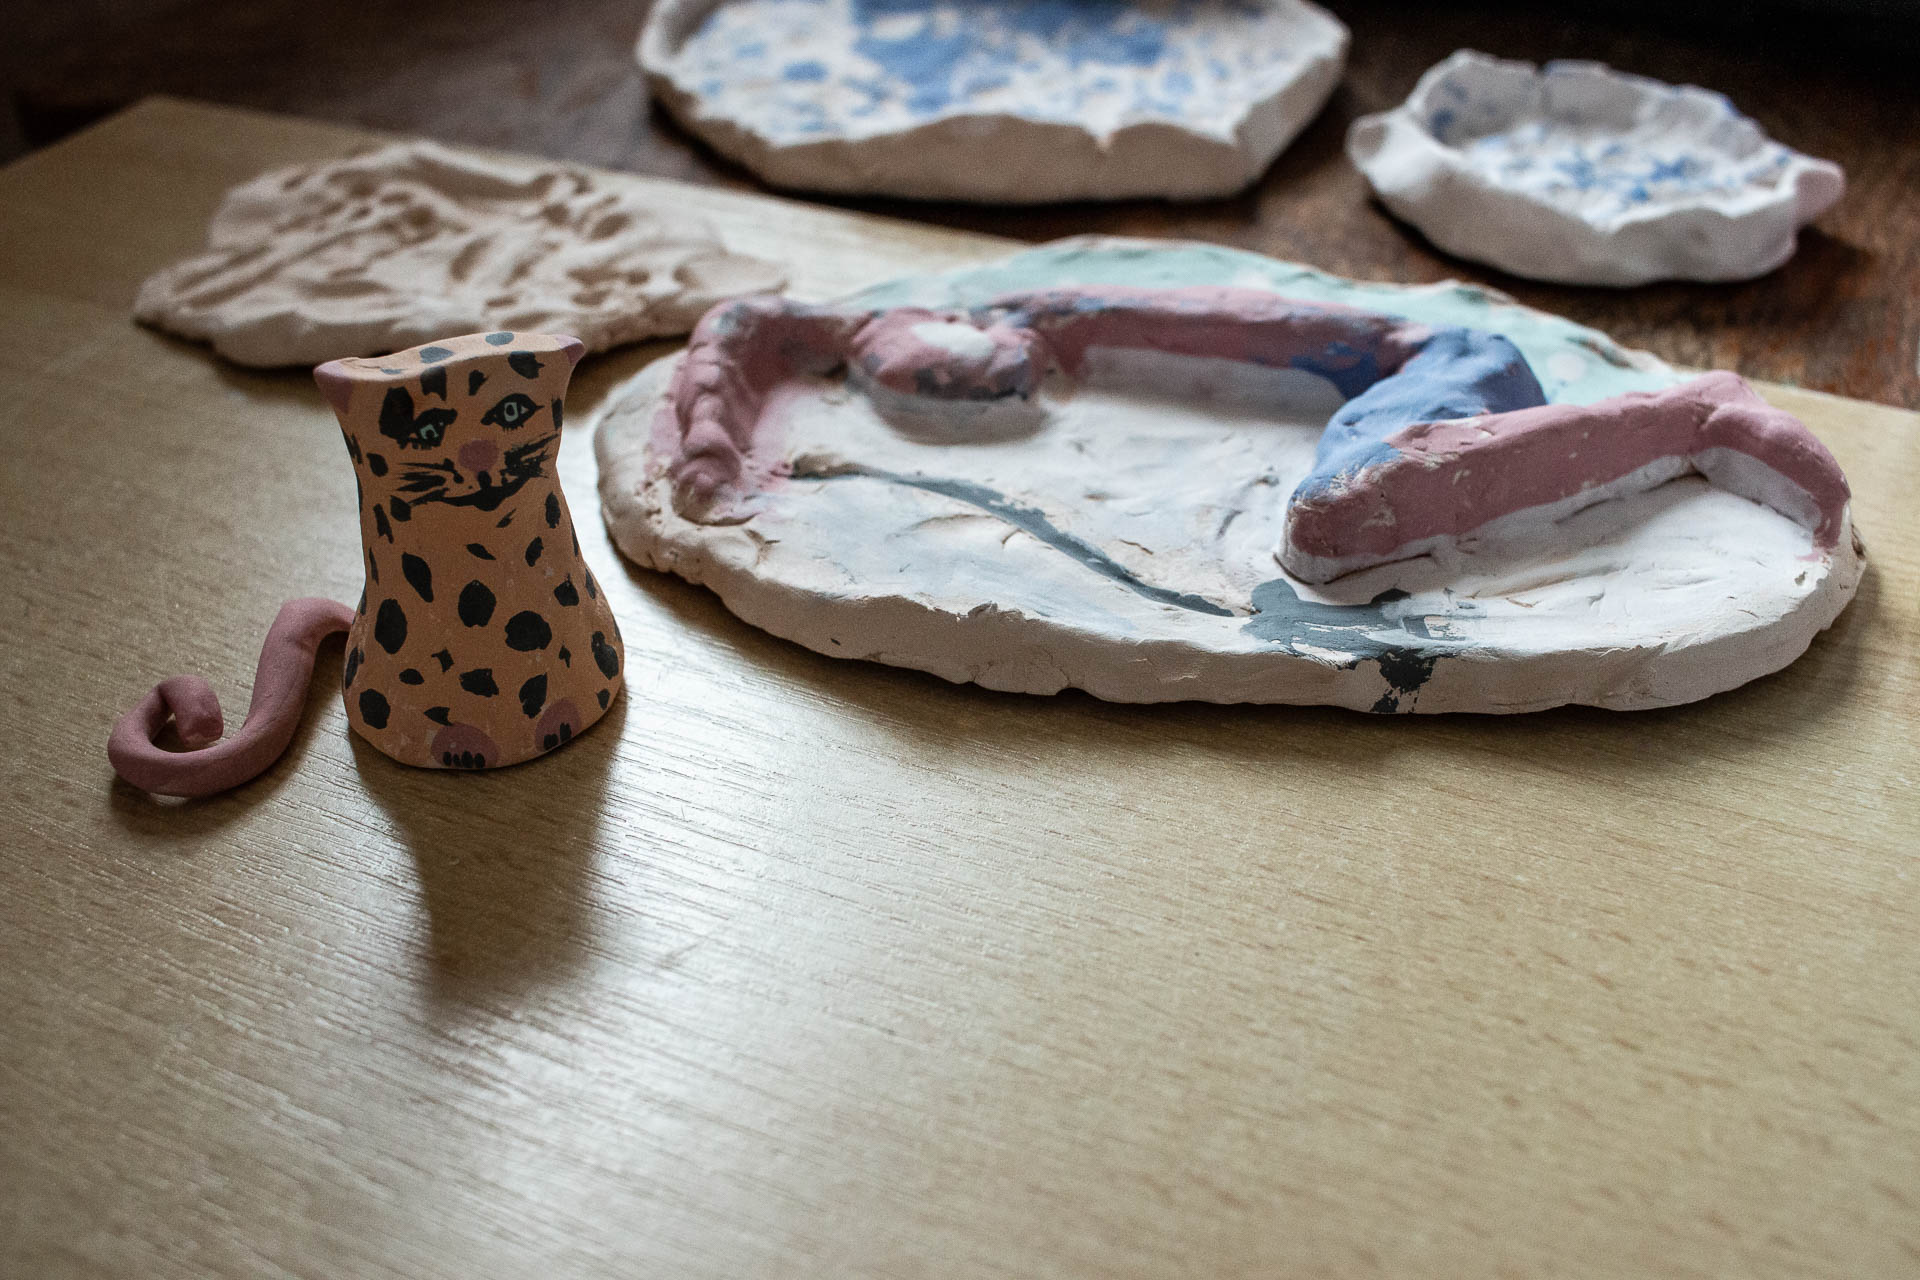 Detail of hand-colored clay creations with cheetah at the front